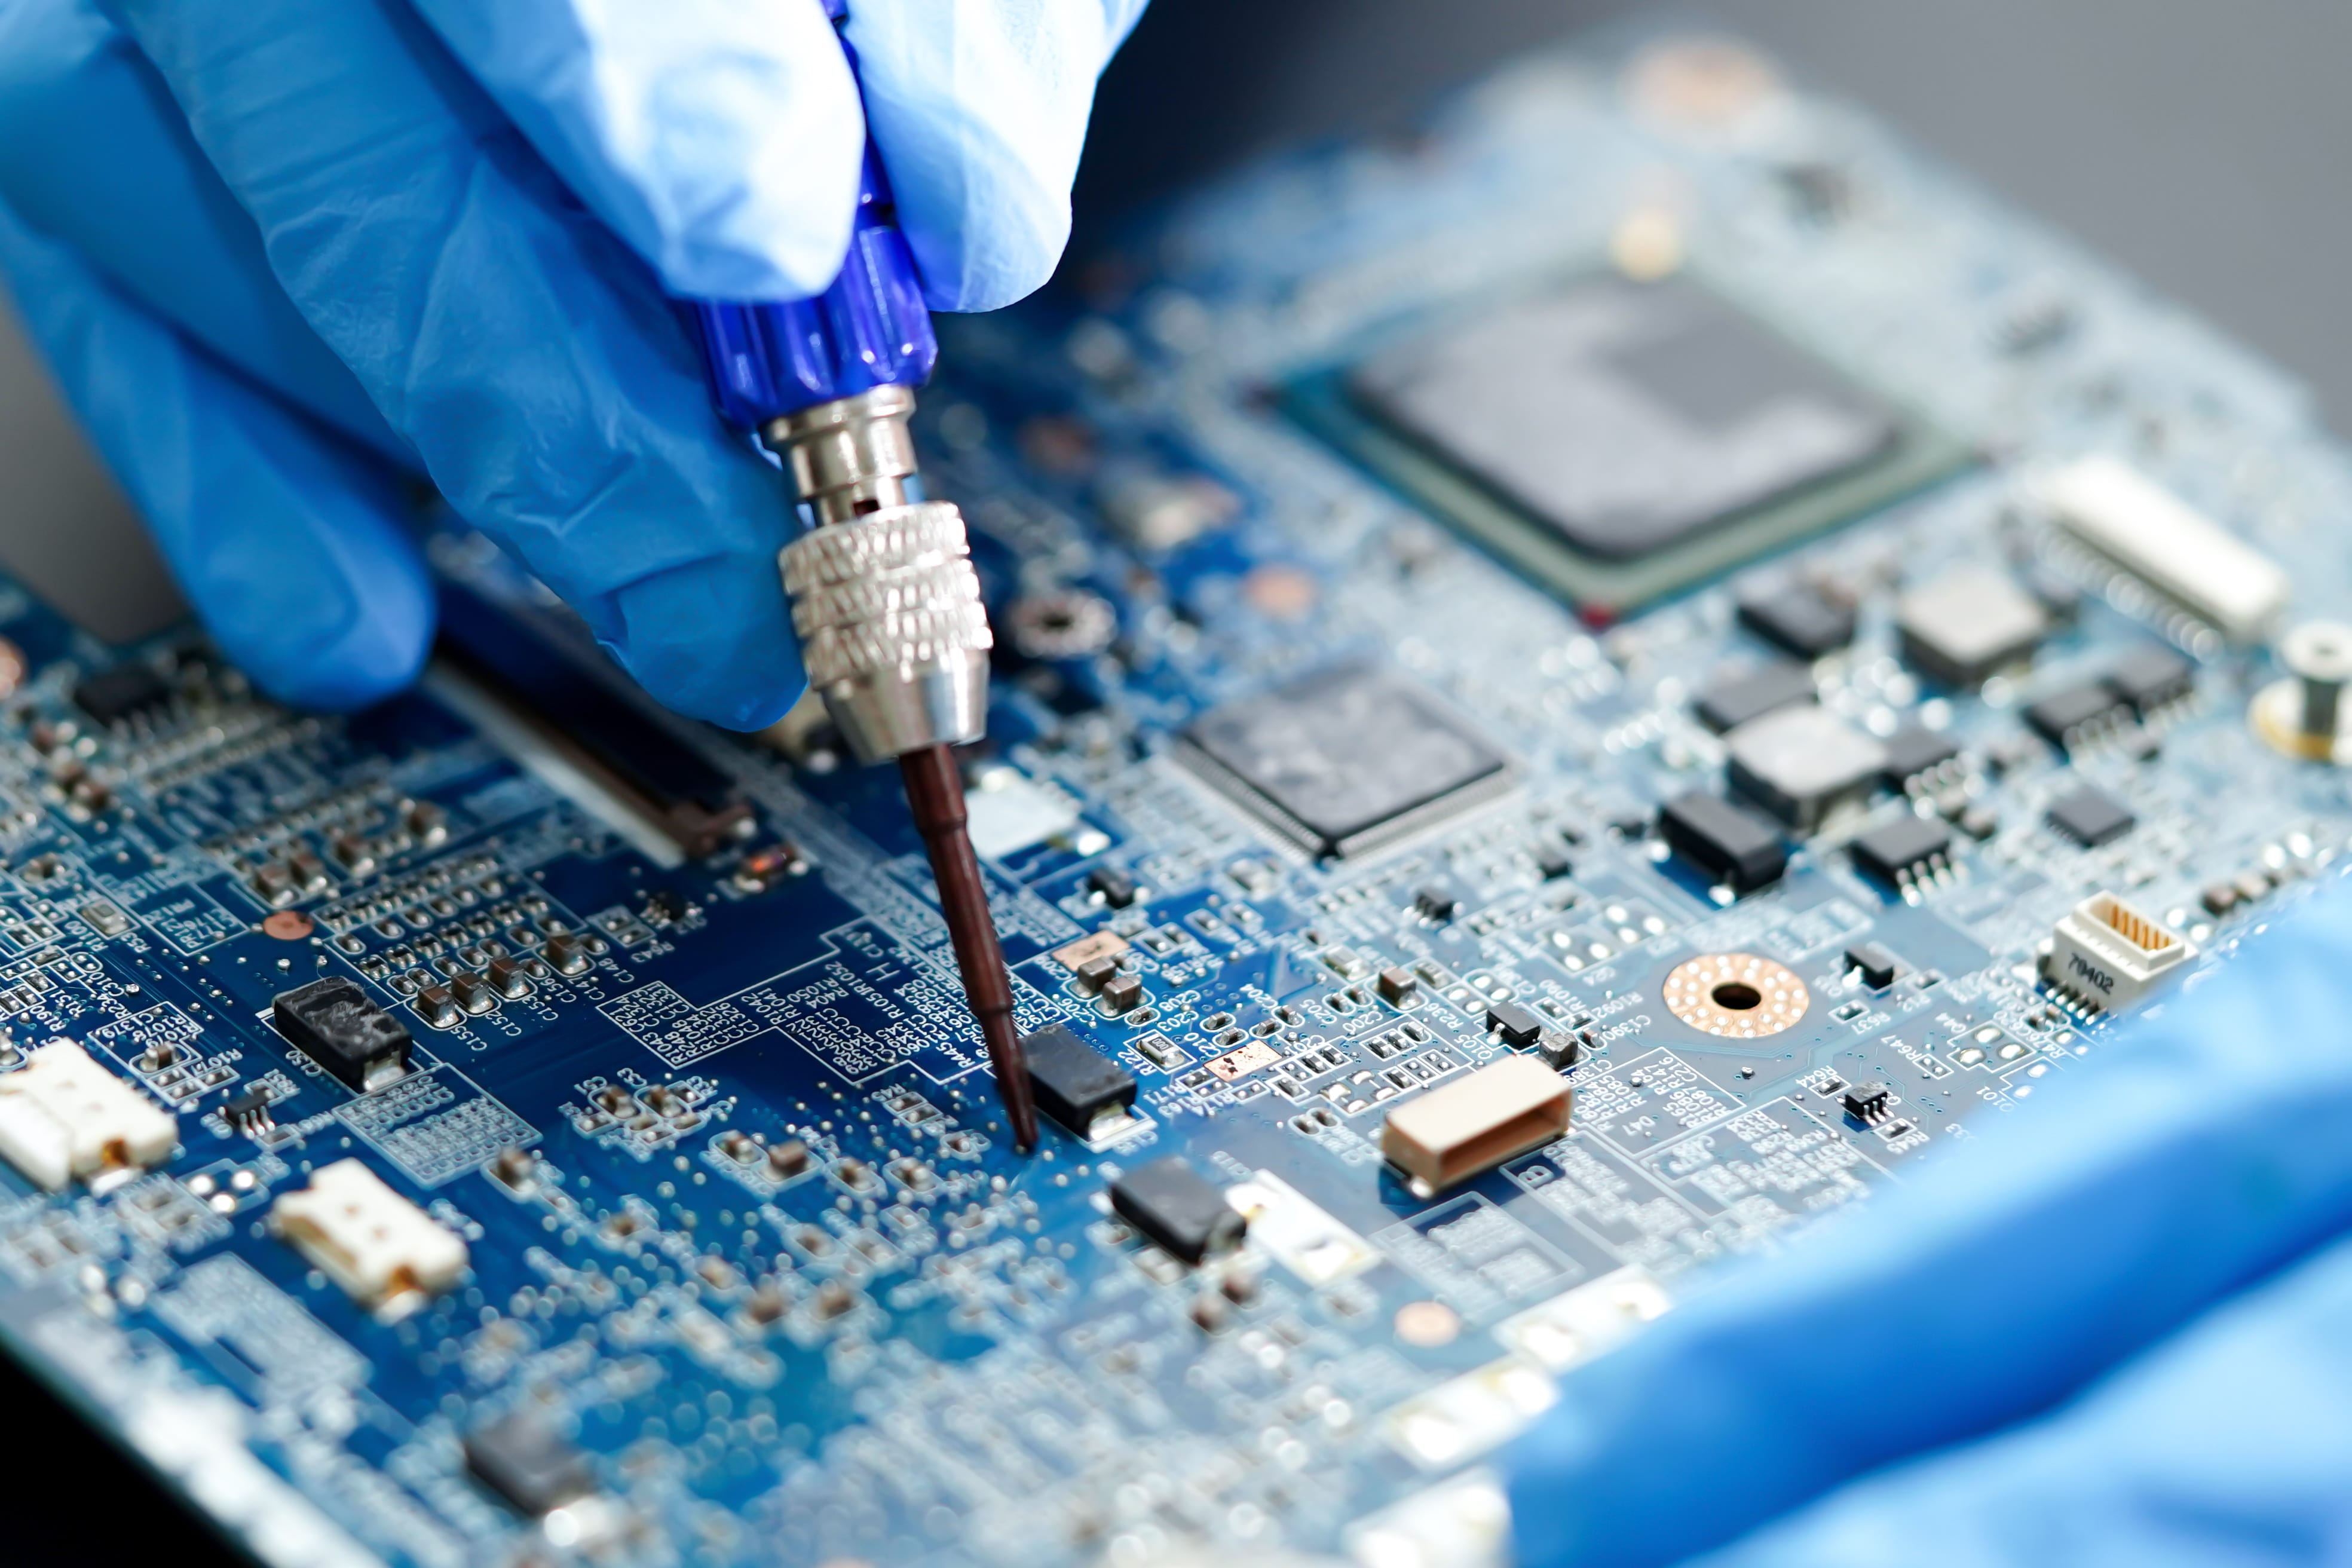 Right to Repair Laws: An Overview and Legislative Update